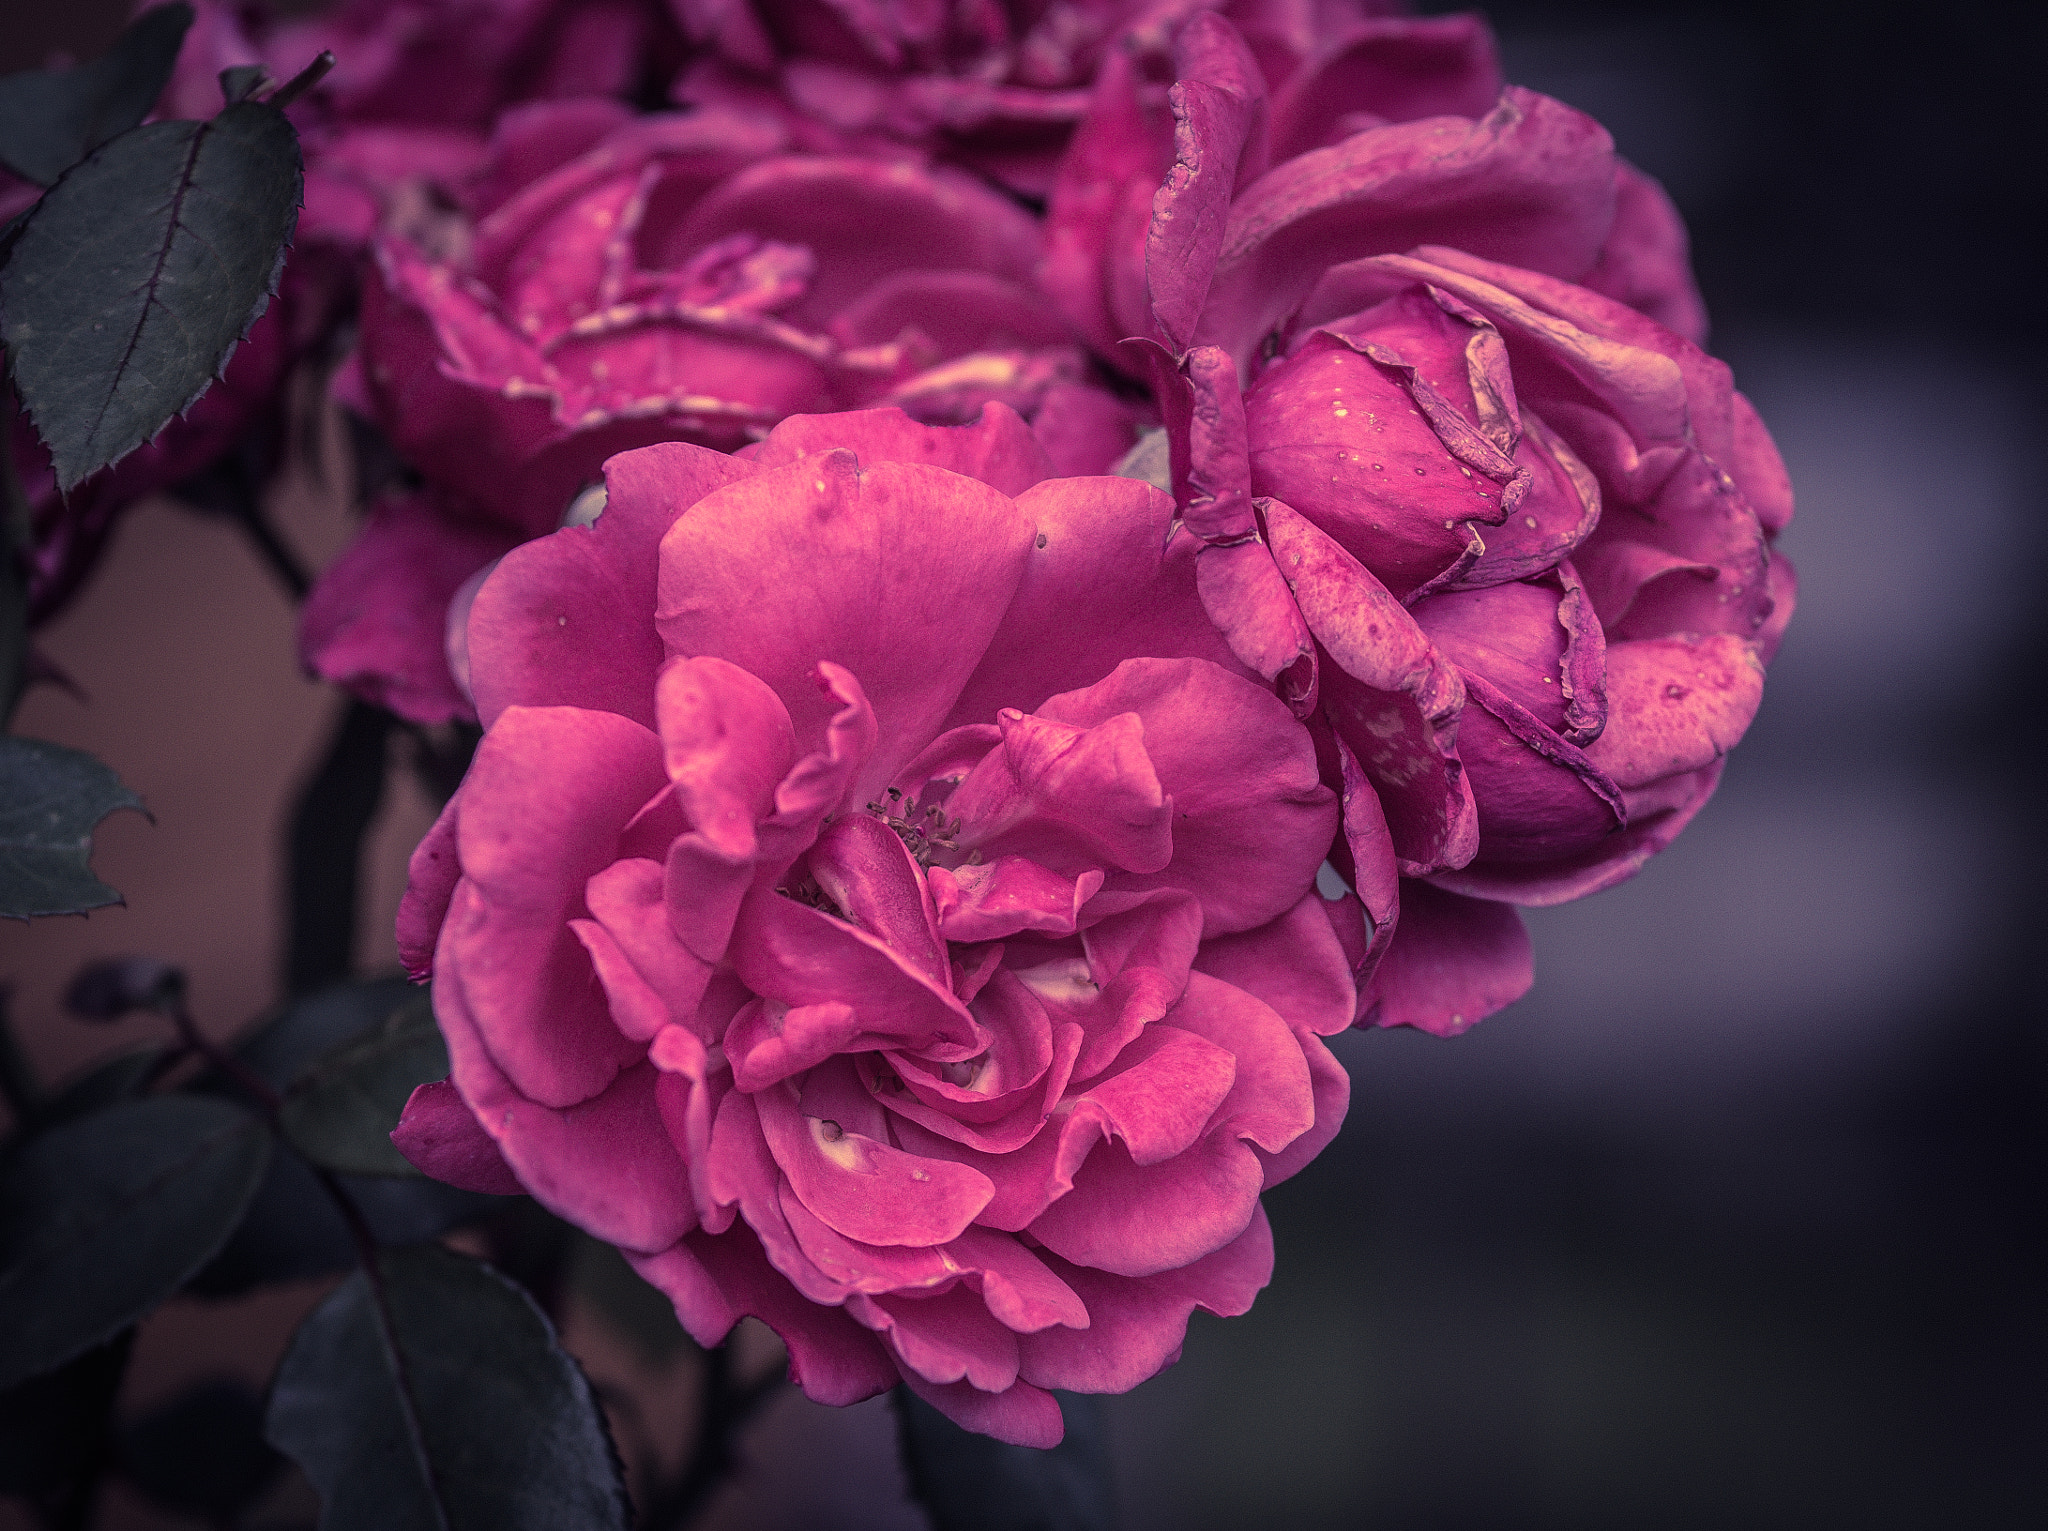 Olympus OM-D E-M10 + Sigma 60mm F2.8 DN Art sample photo. Old roses in vintage style photography